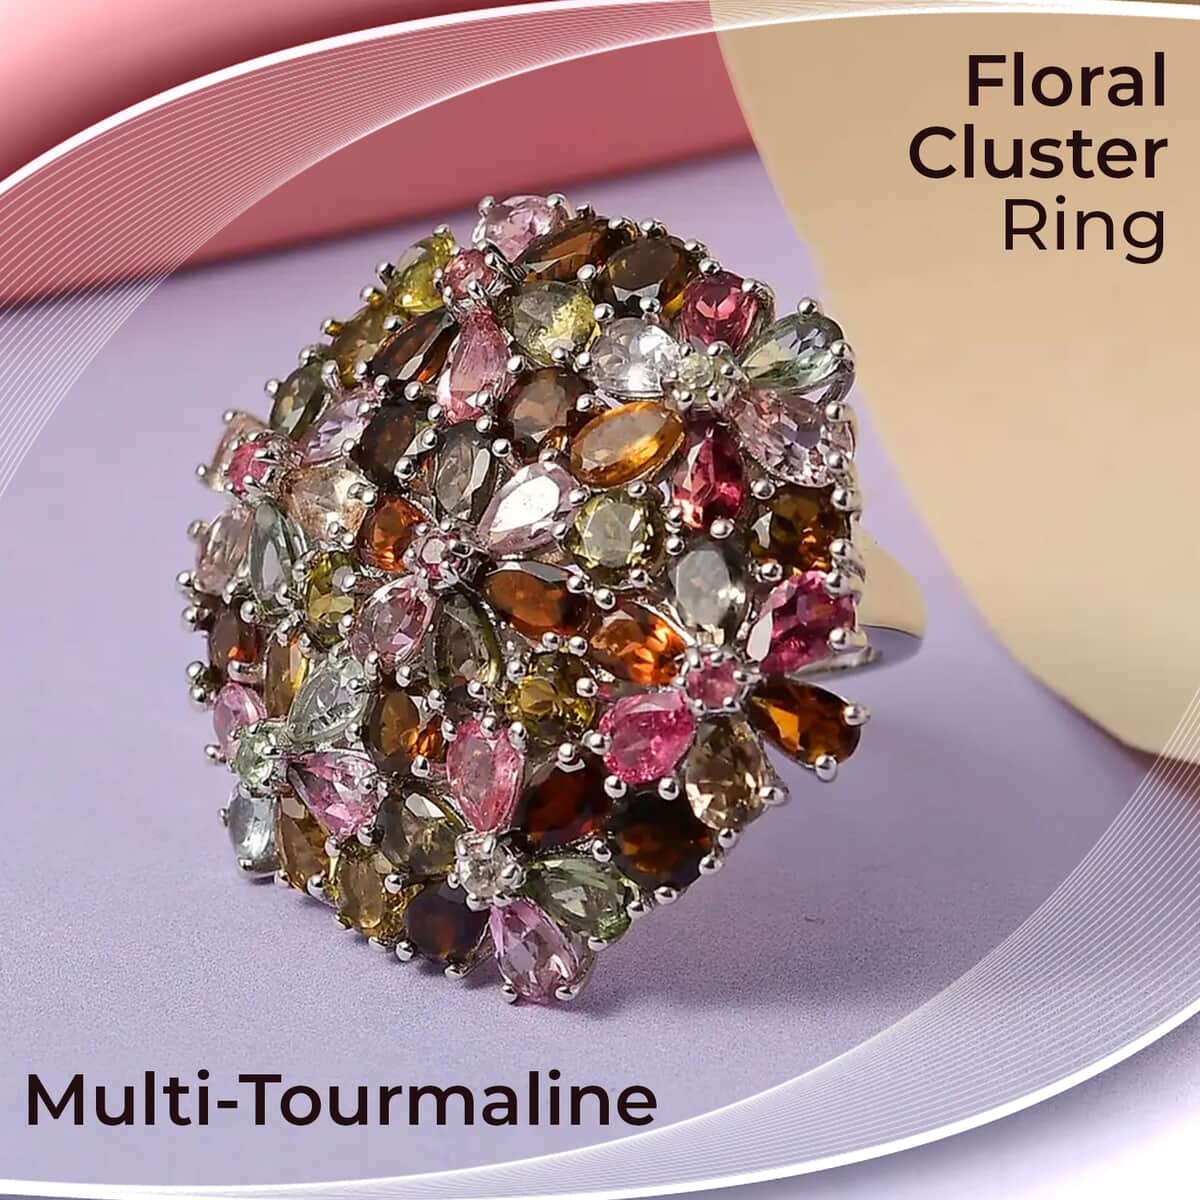 Multi-Tourmaline Floral Ring, Multi Tourmaline Ring, Floral Cluster Ring, Platinum Over Sterling Silver Ring 11.90 ctw (Size 7) image number 1